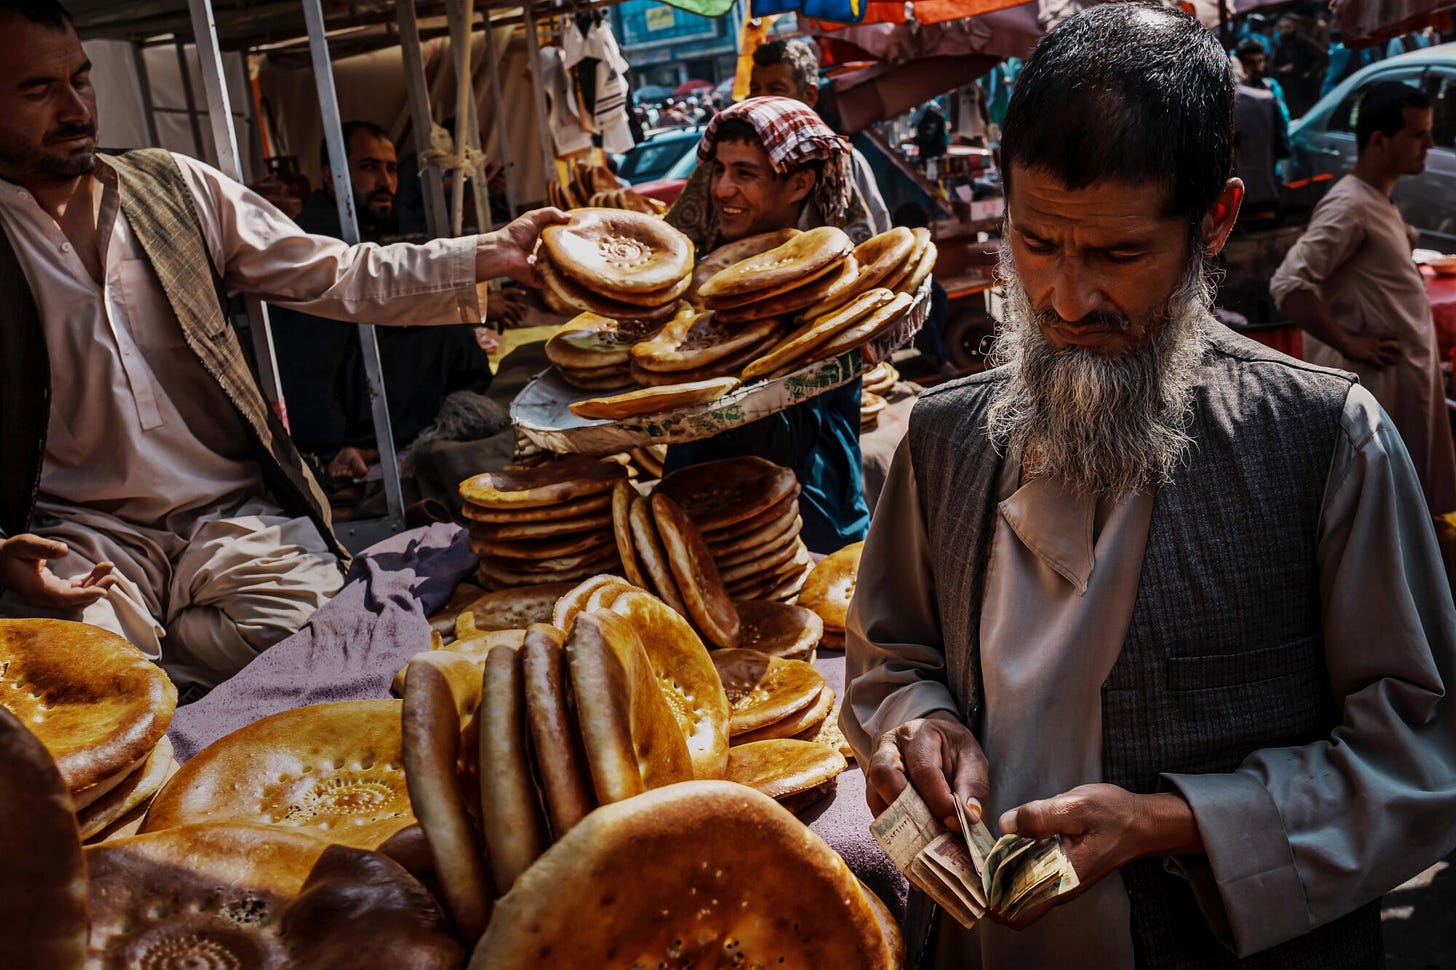 A man counting his Afghan currency before paying for bread